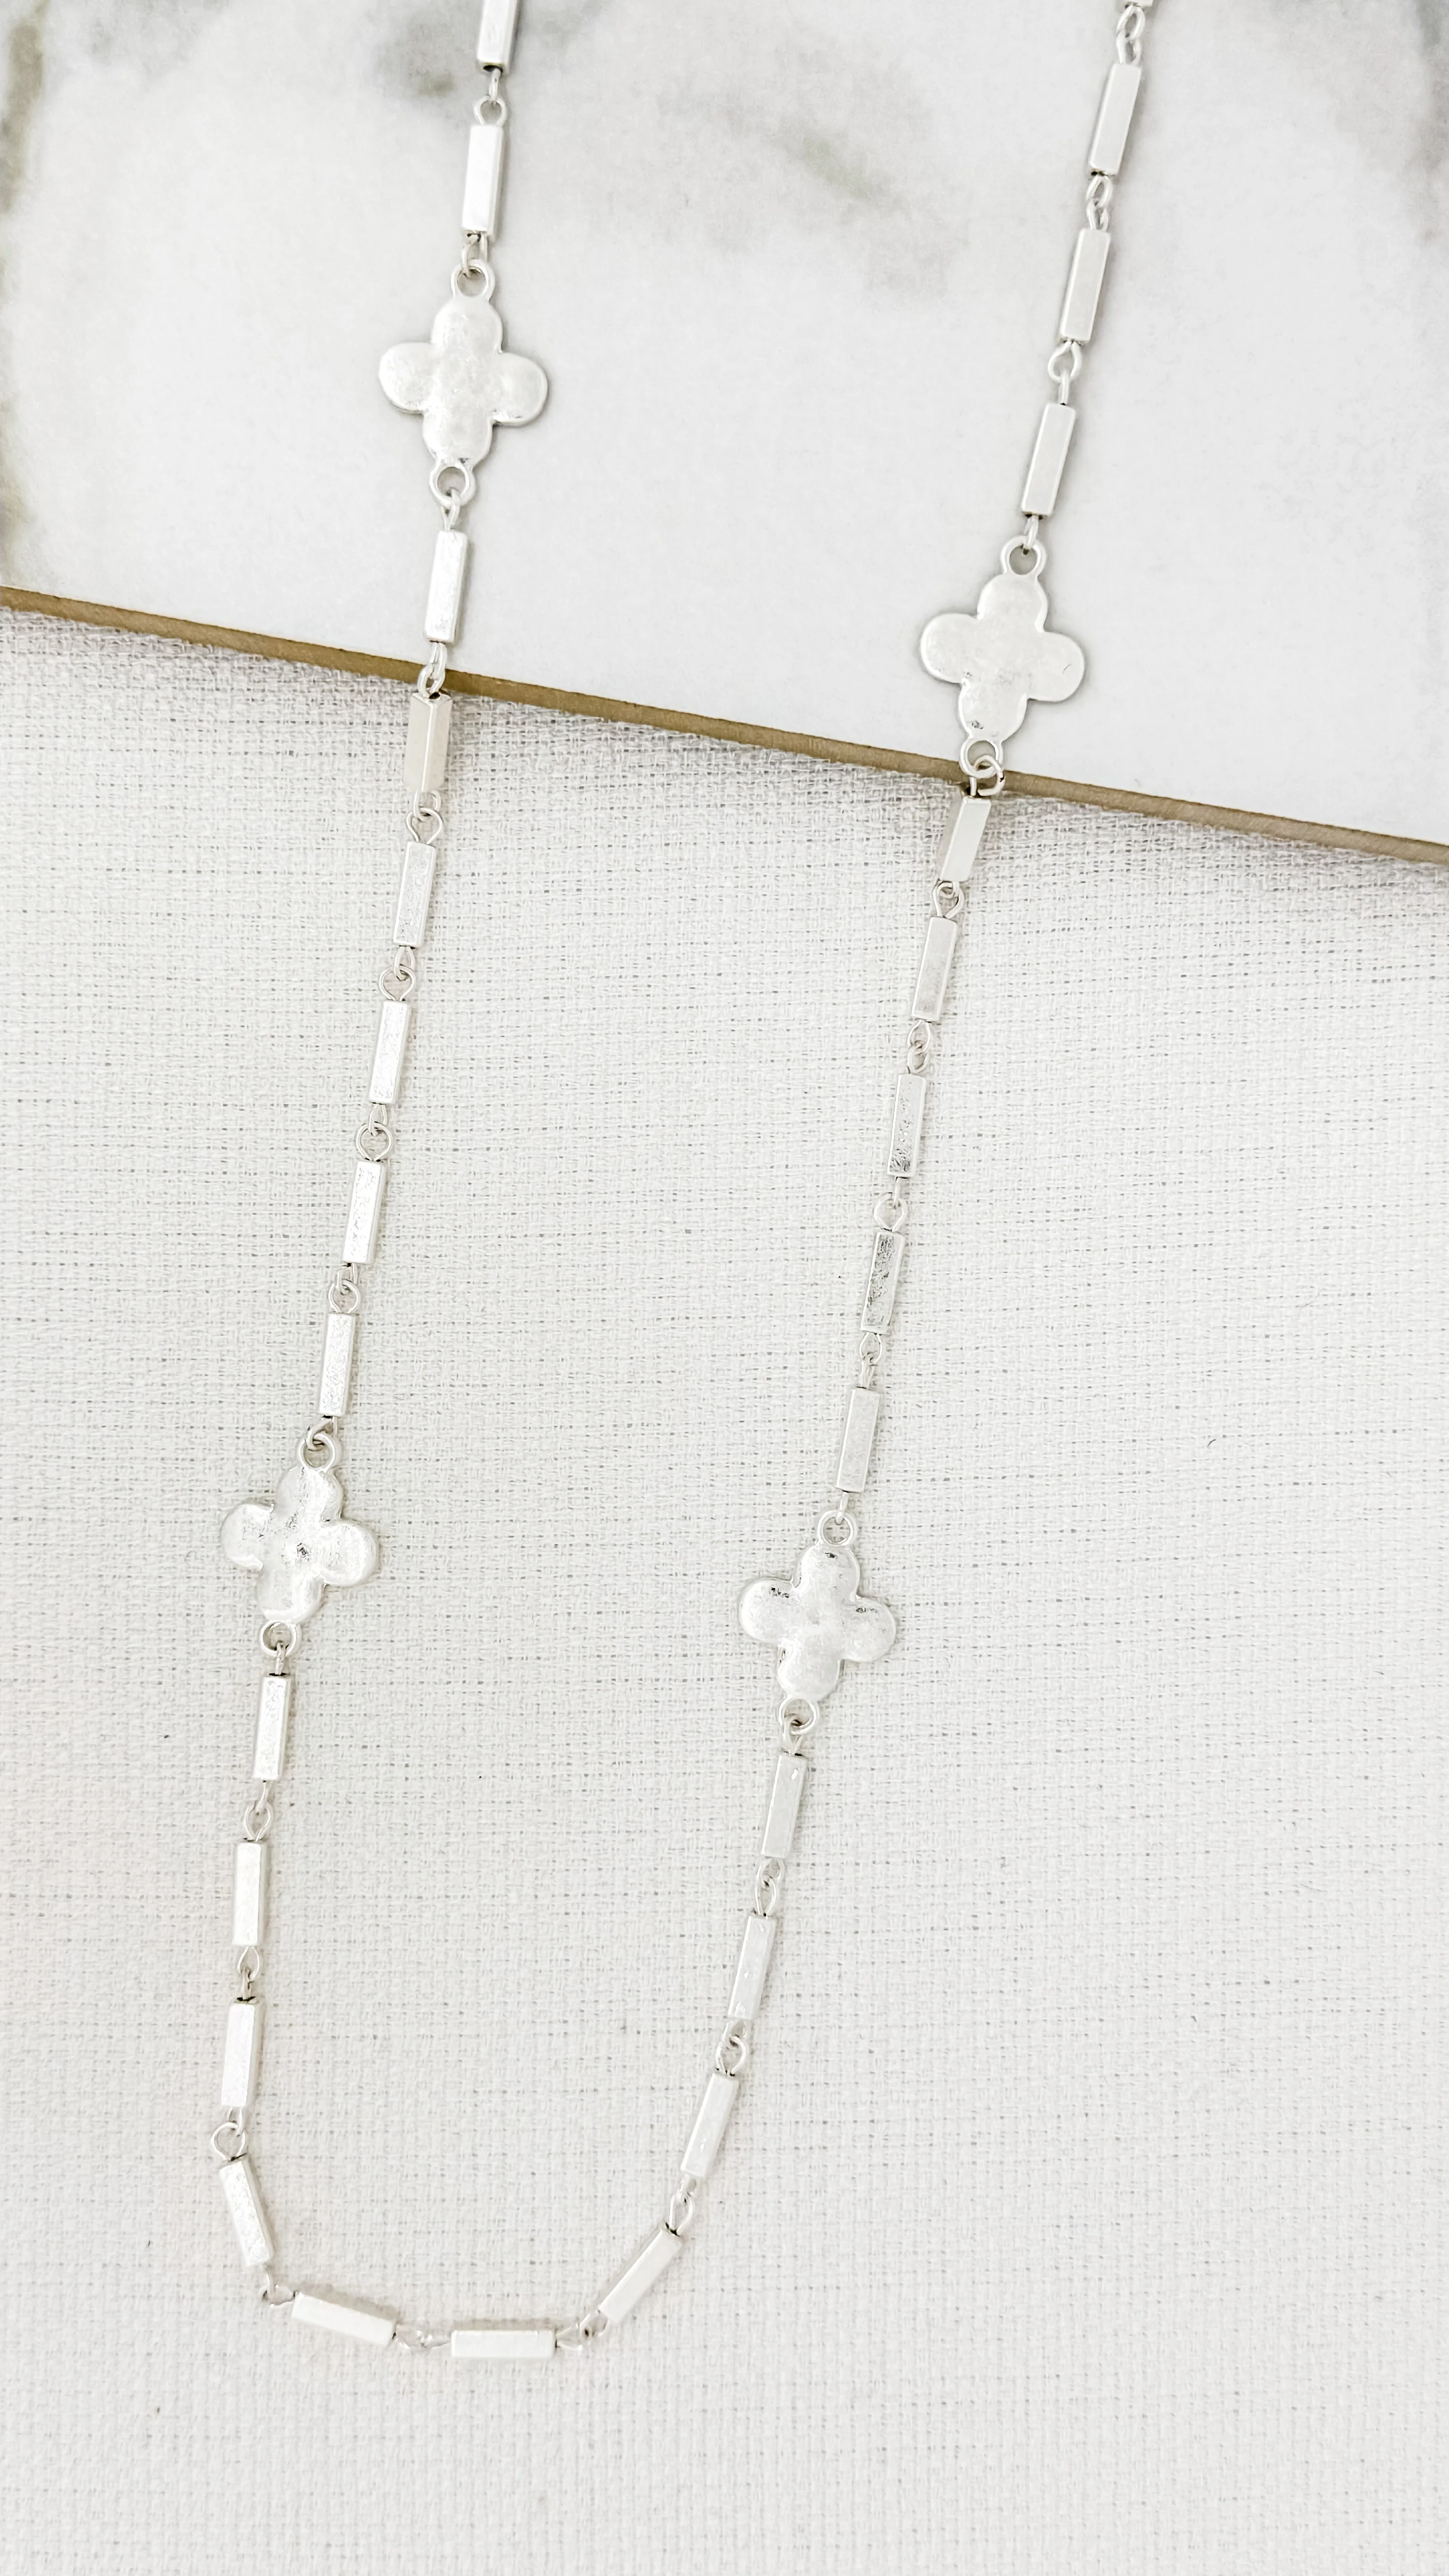 Envy Long Worn Silver Necklace with Silver Fleurs